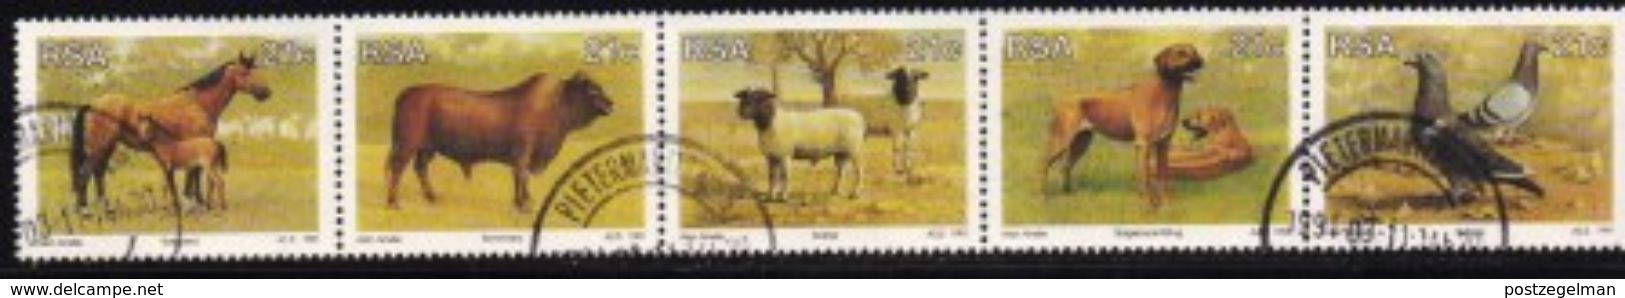 SOUTH AFRICA 1991 CTO Stamp(s) Animals 813-817 #3611 - Farm